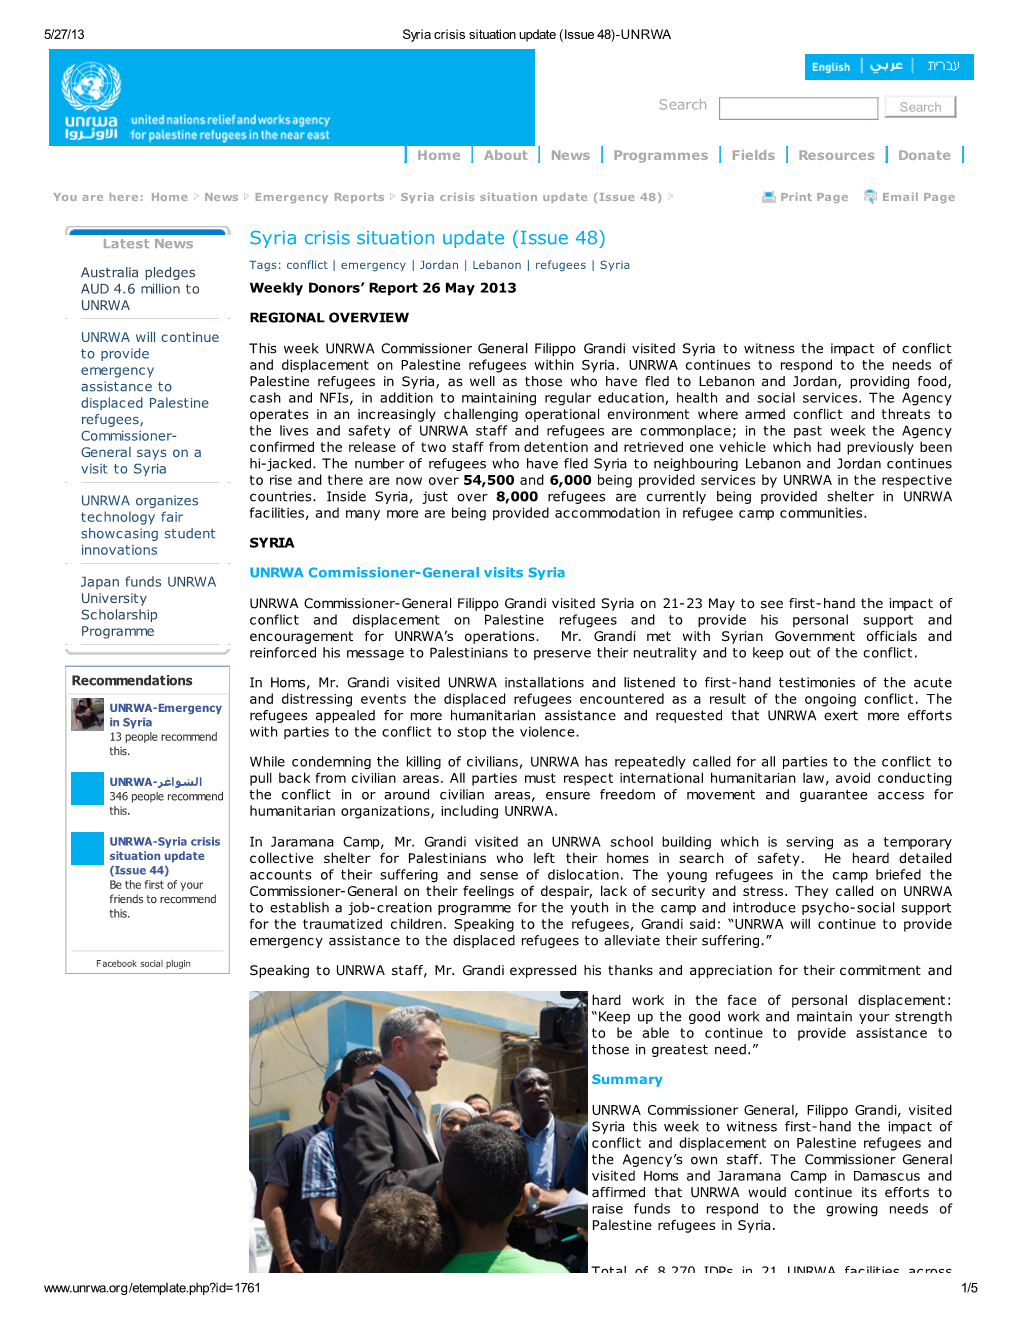 Syria Crisis Situation Update (Issue 48)-UNRWA